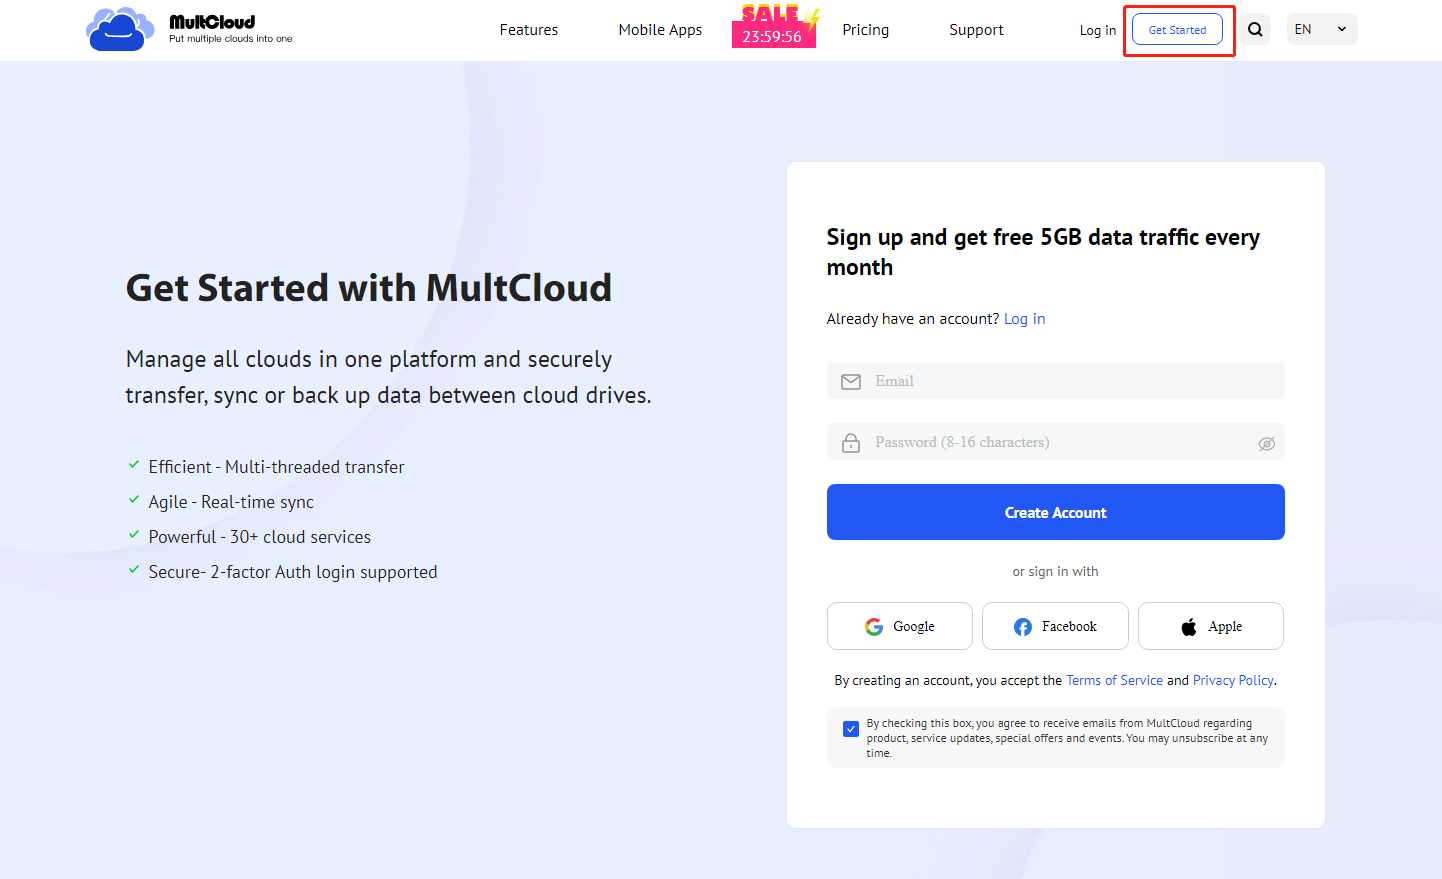 Getting Started with MultCloud